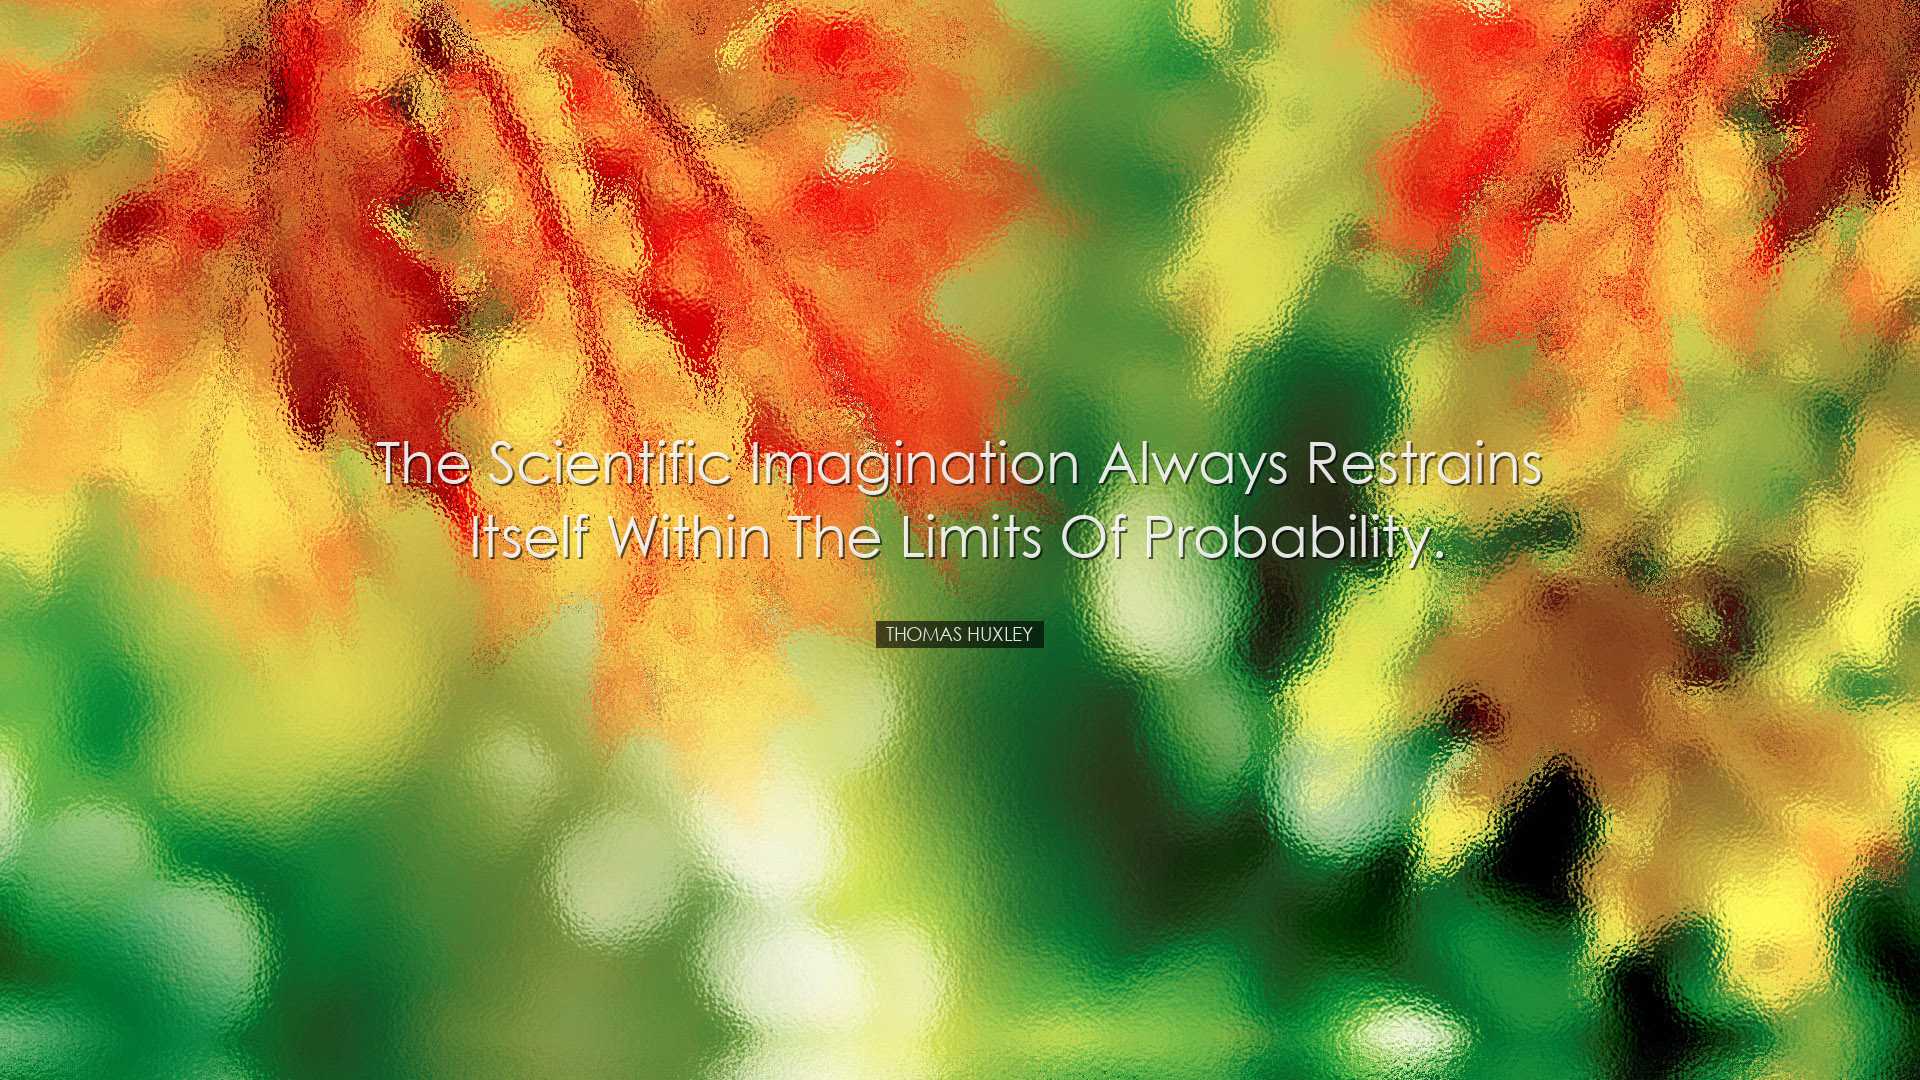 The scientific imagination always restrains itself within the limi